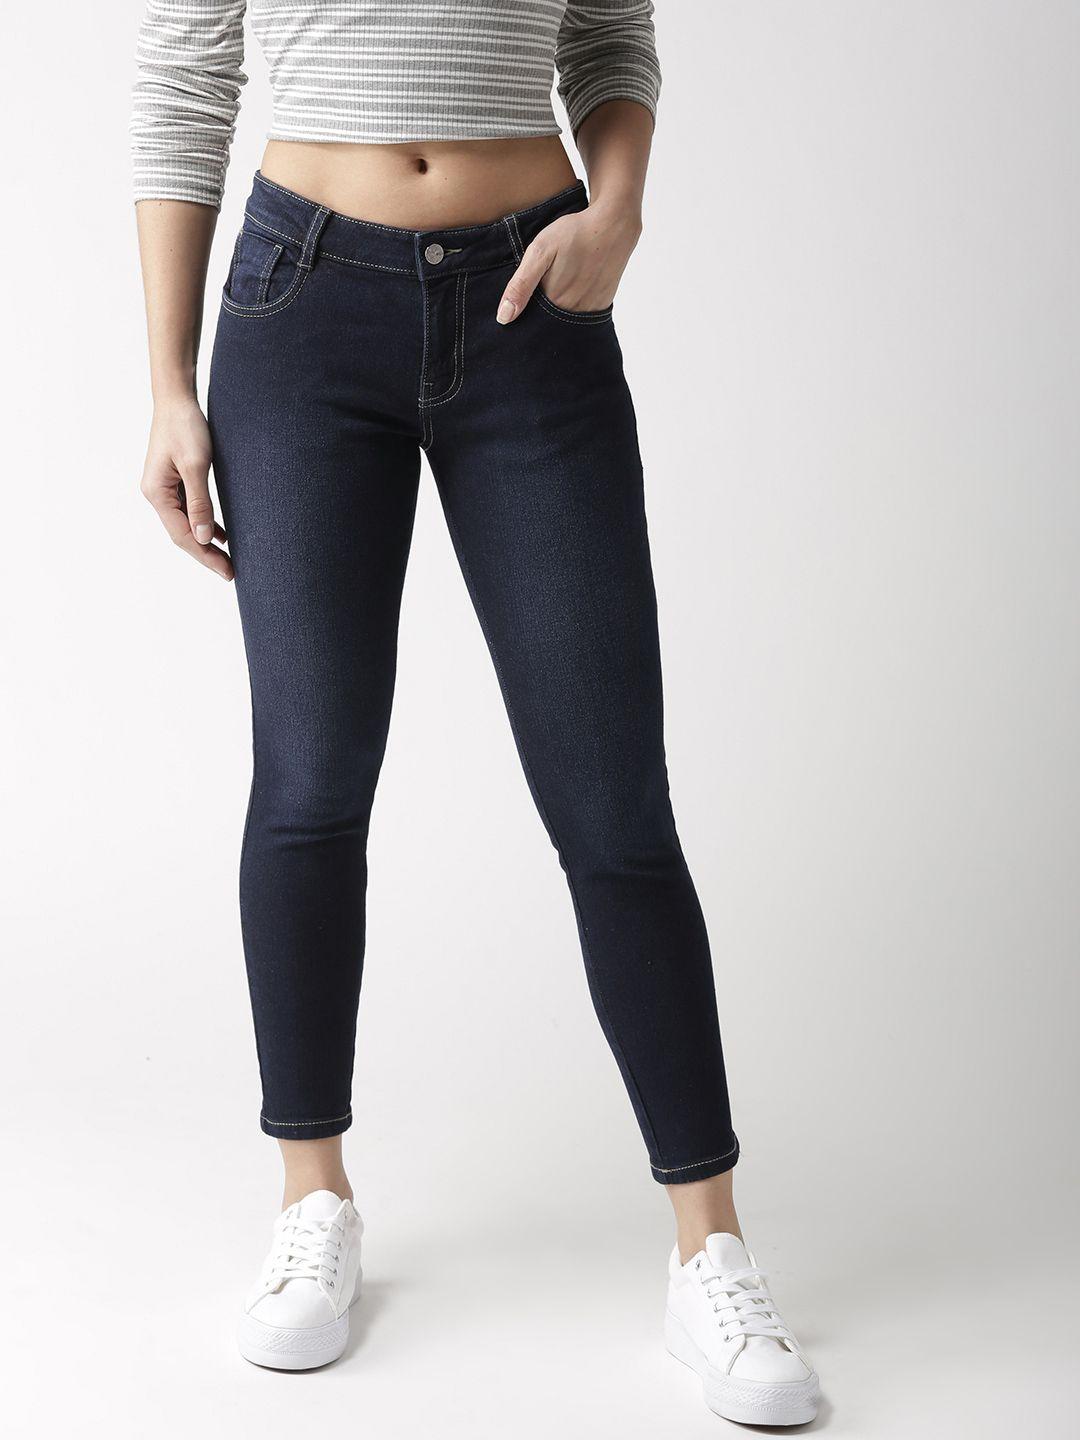 mast & harbour women navy blue skinny fit mid-rise clean look cropped stretchable jeans